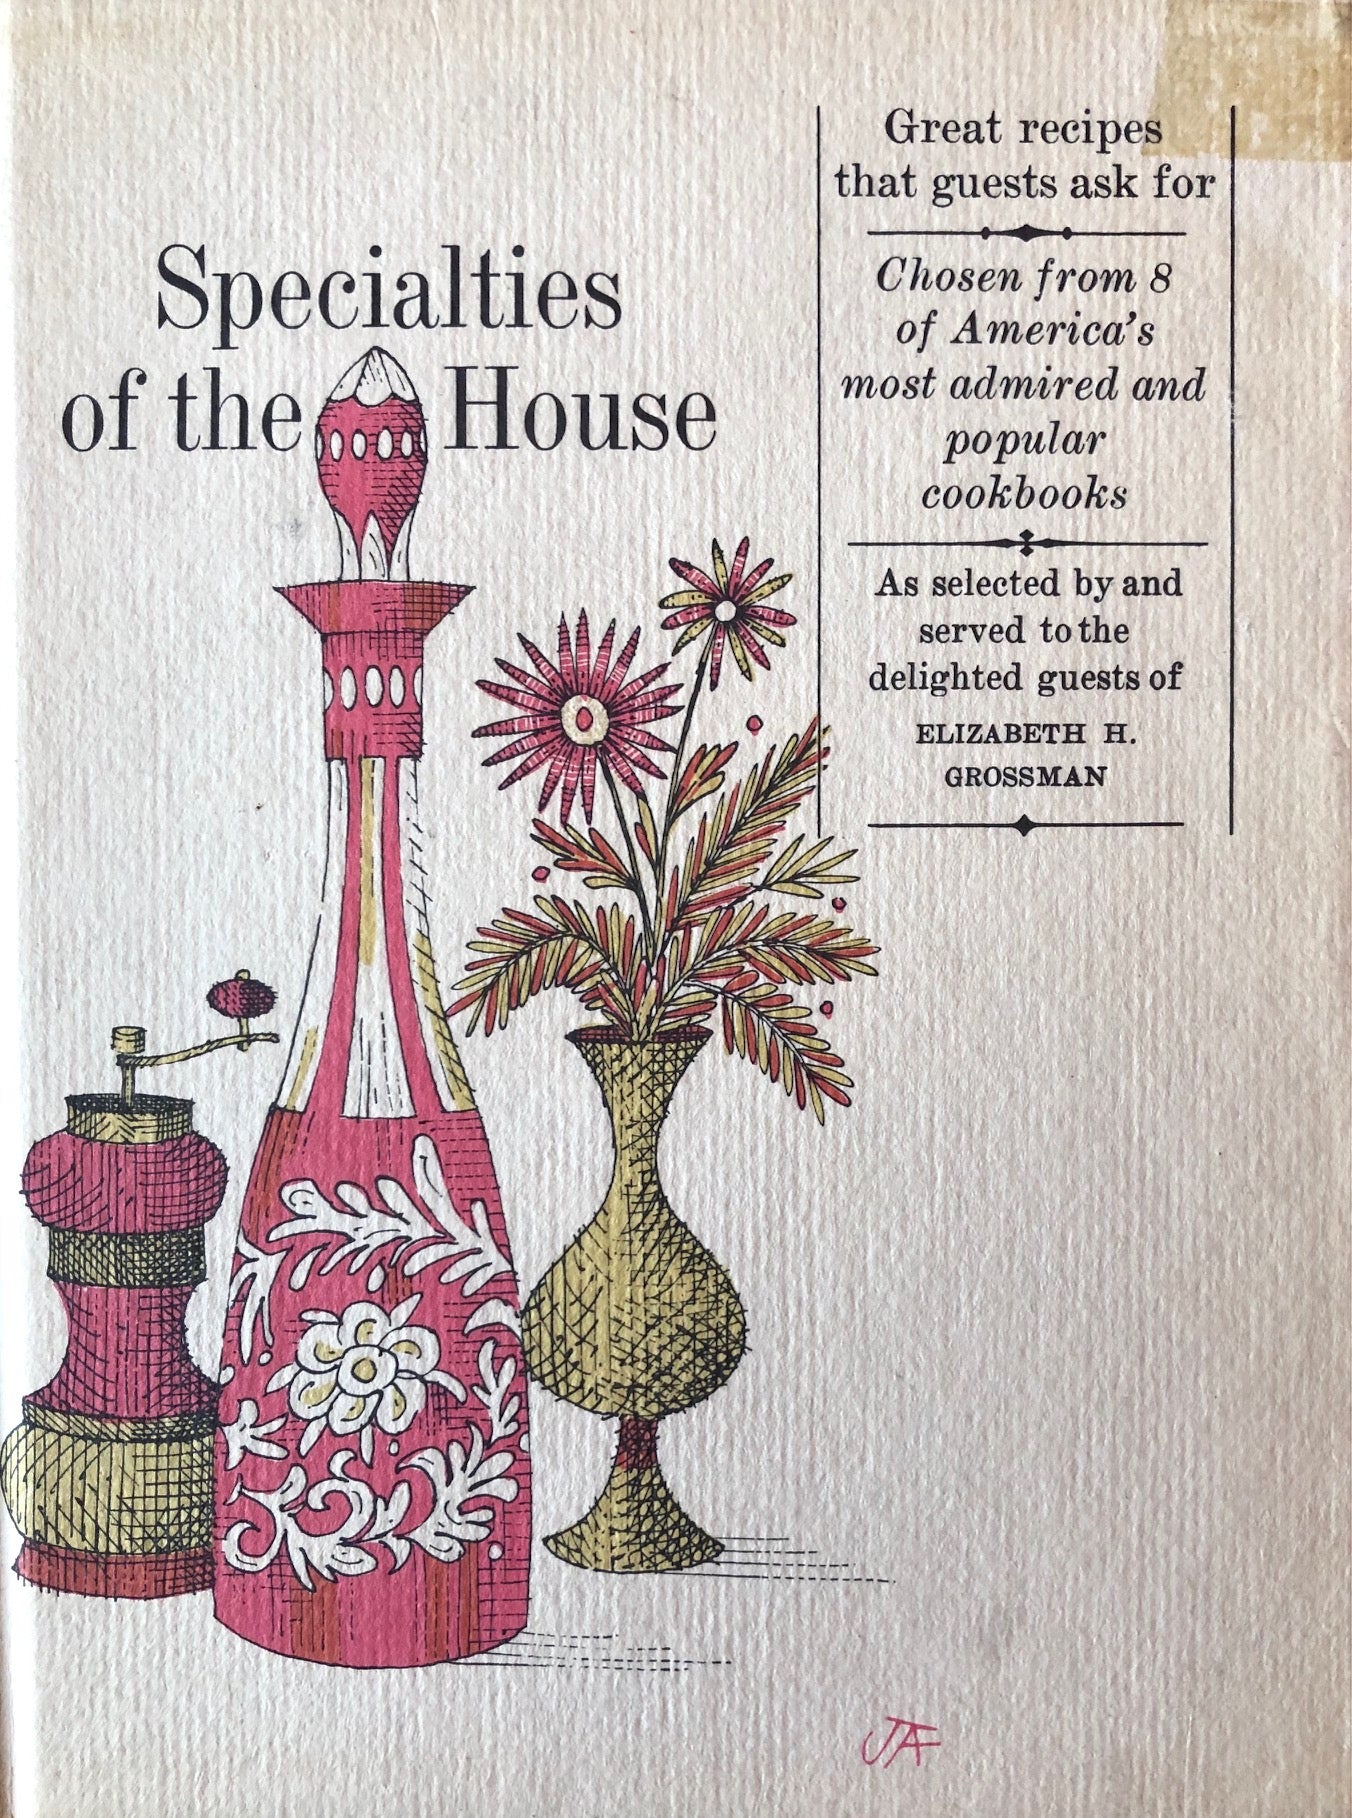 (American) Elizabeth Grossman, ed. Specialties of the House: Great Recipes that Guests Ask For, Chosen from Eight of America's Most Admired and Popular Cookbooks.